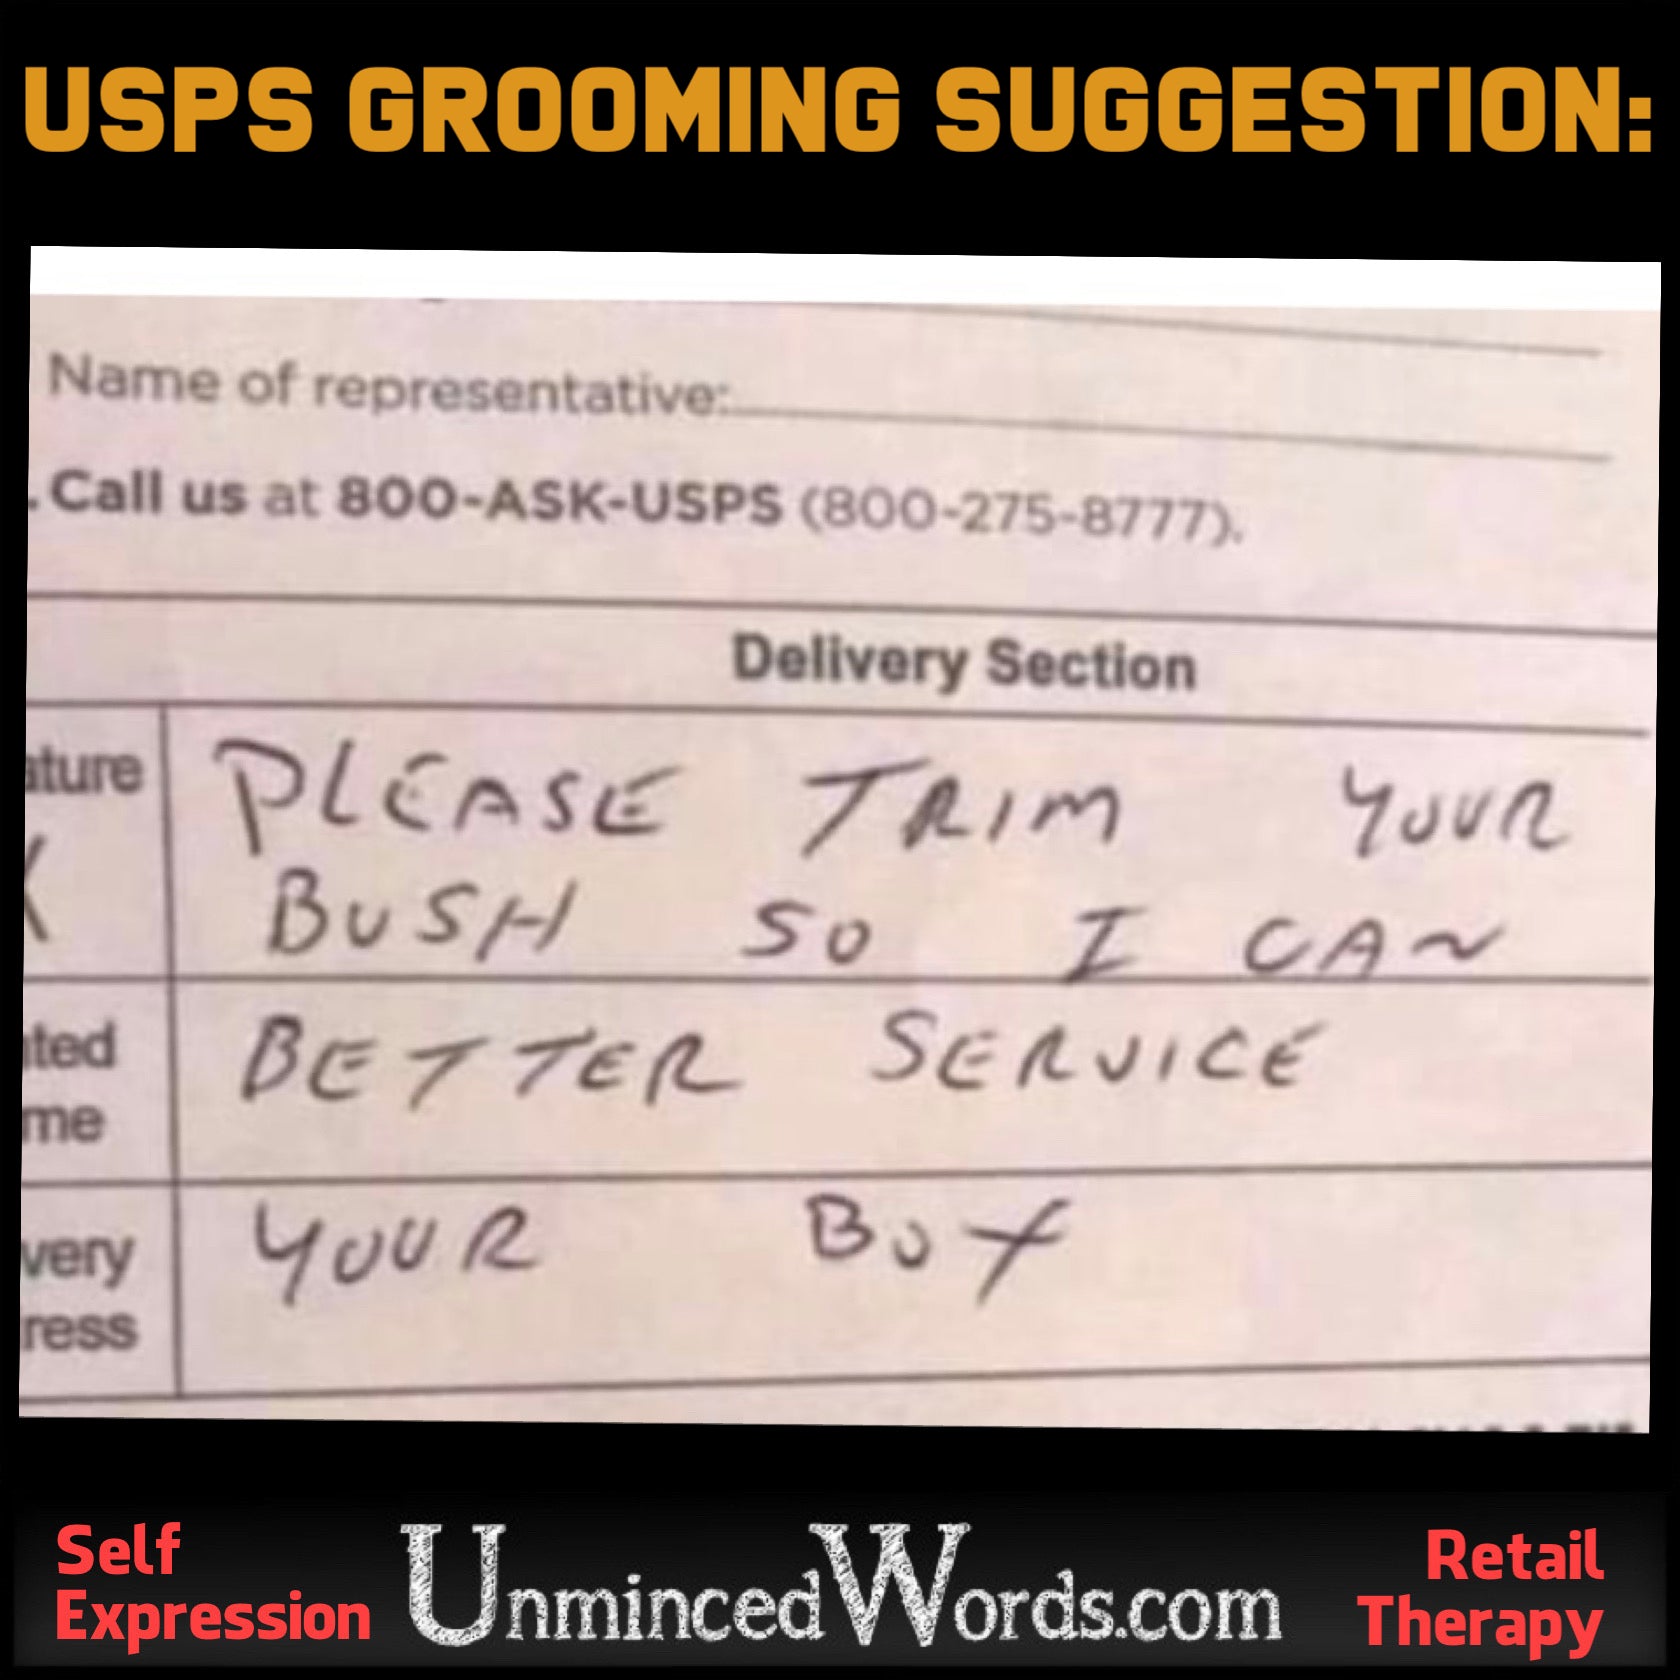 USPS Grooming Suggestion humor for your day